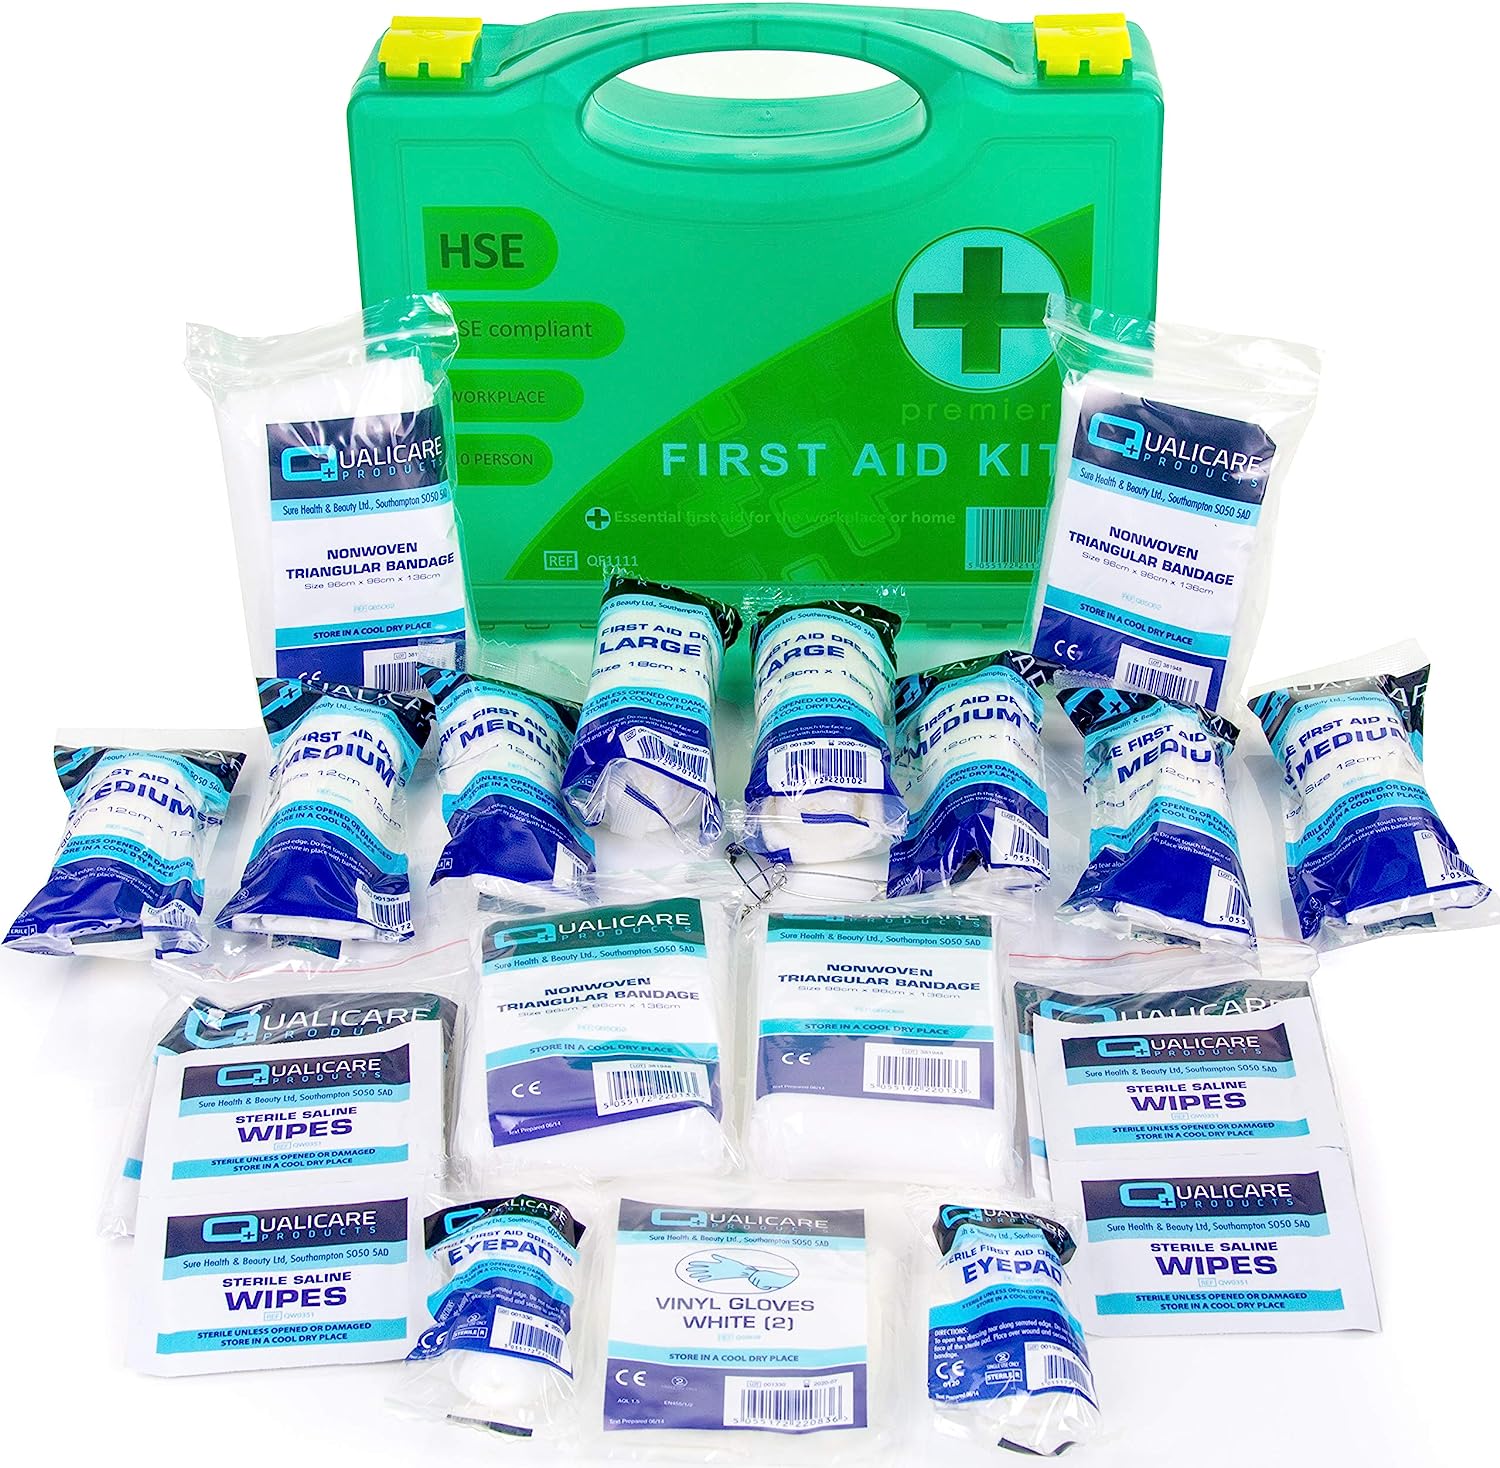 HSE Compliant First Aid Kit - 48 Piece